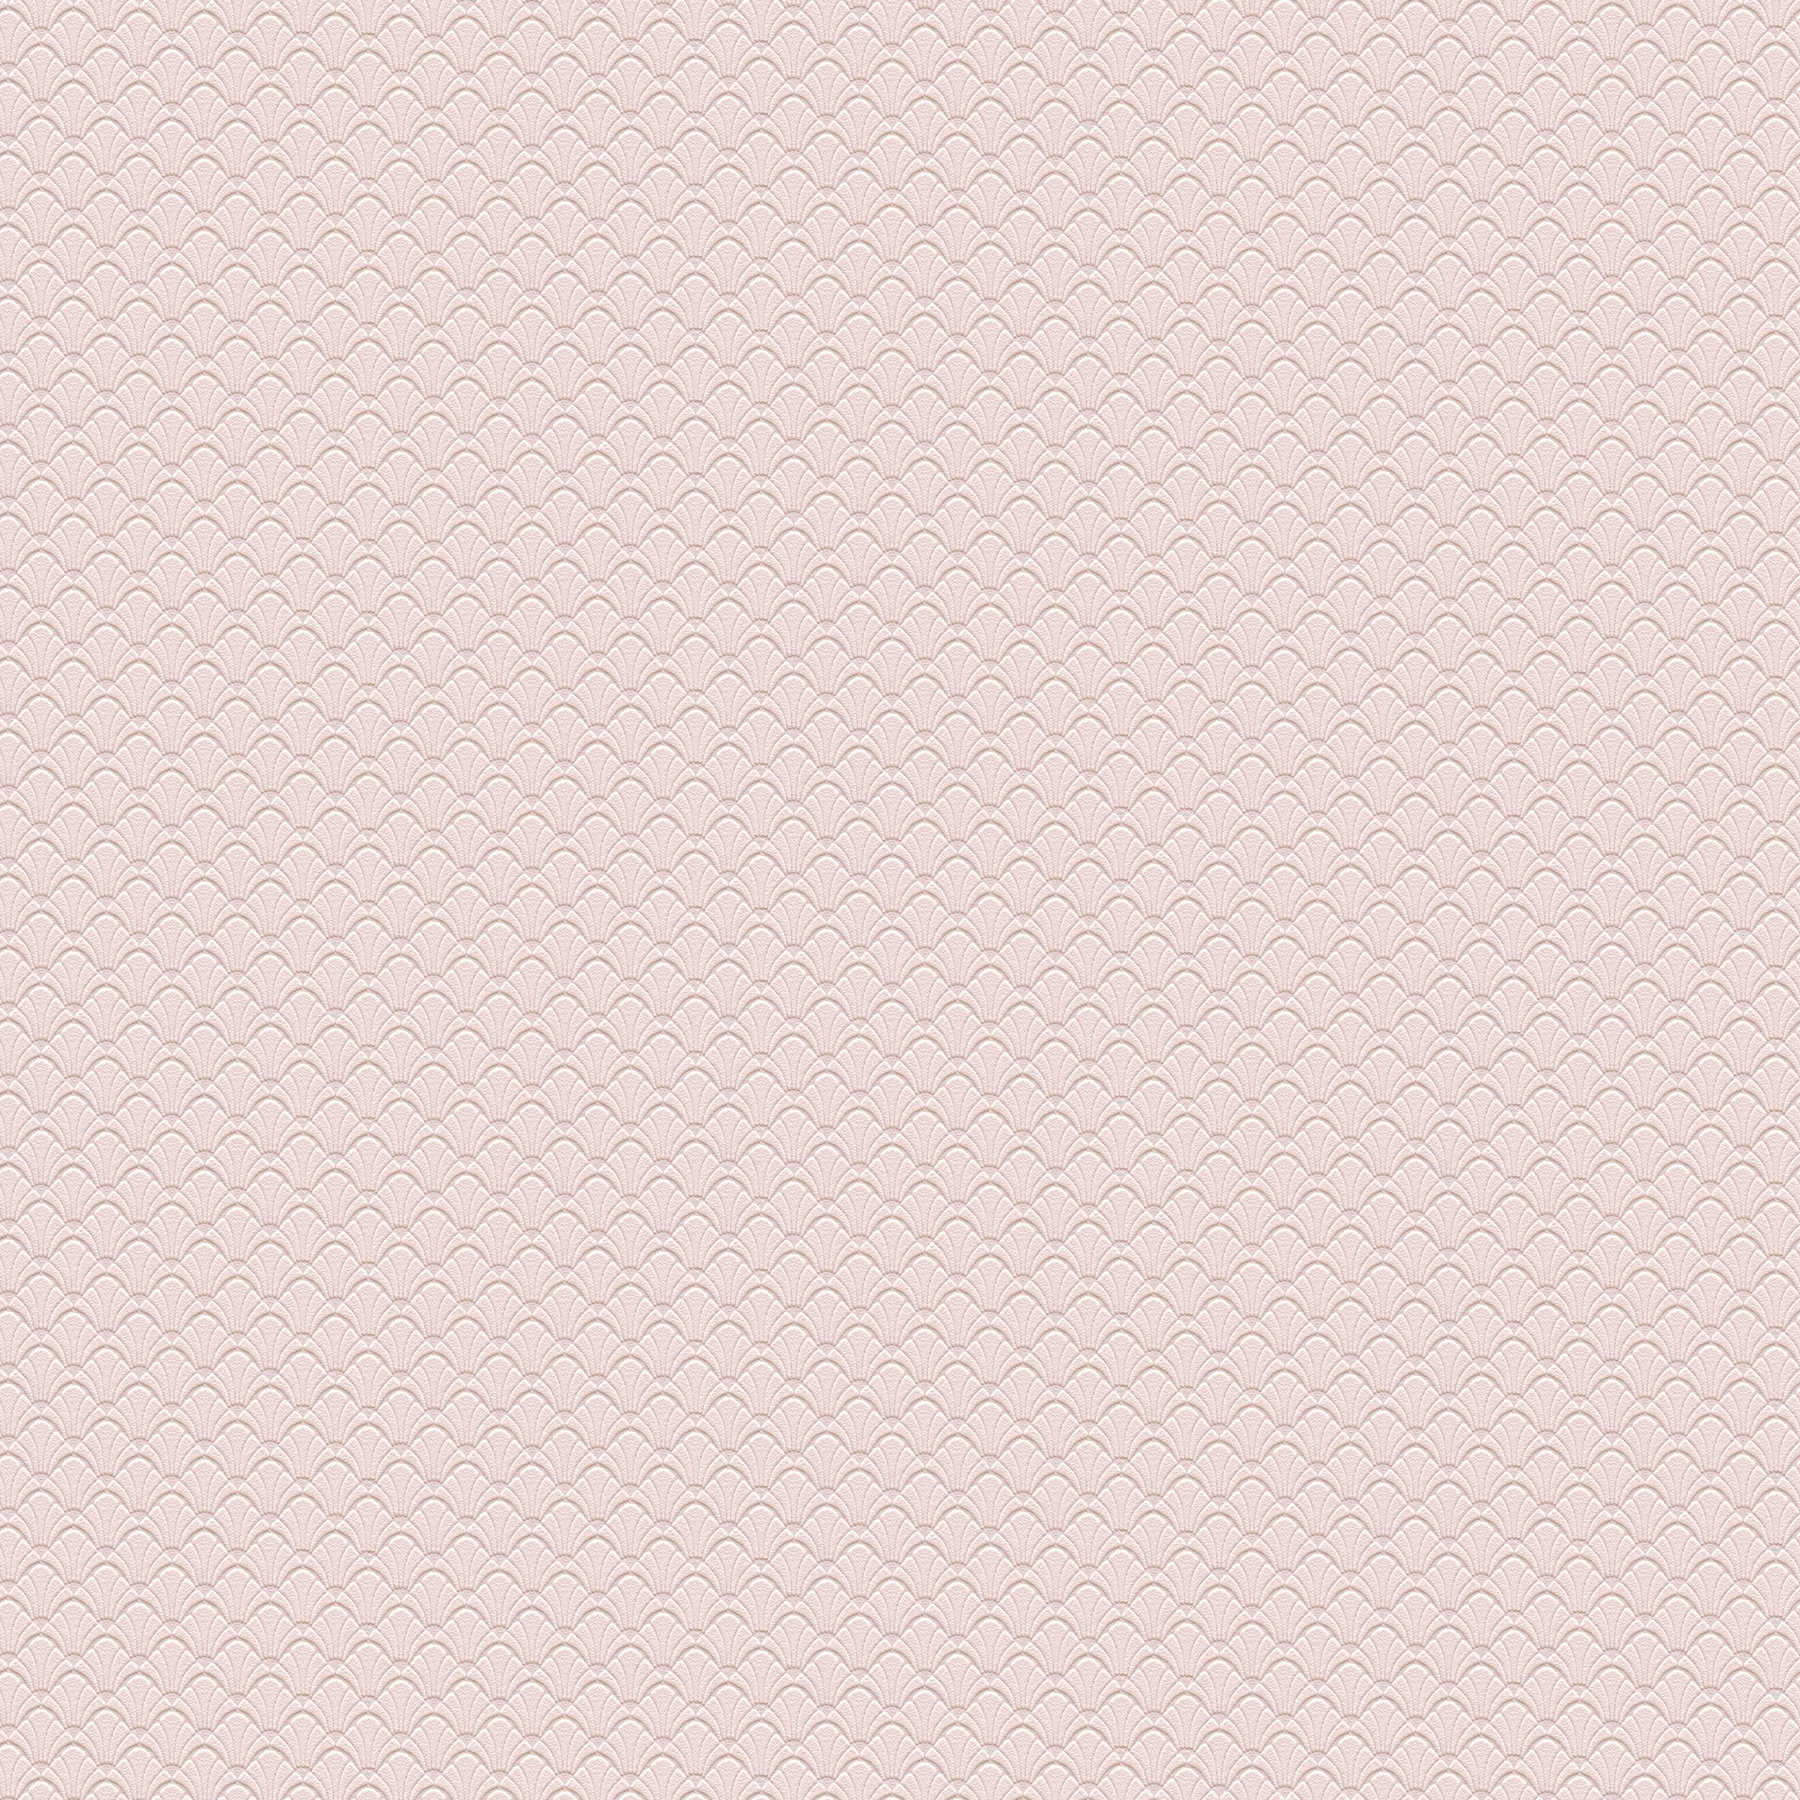         Wallpaper filigree structure pattern in shell design - pink
    